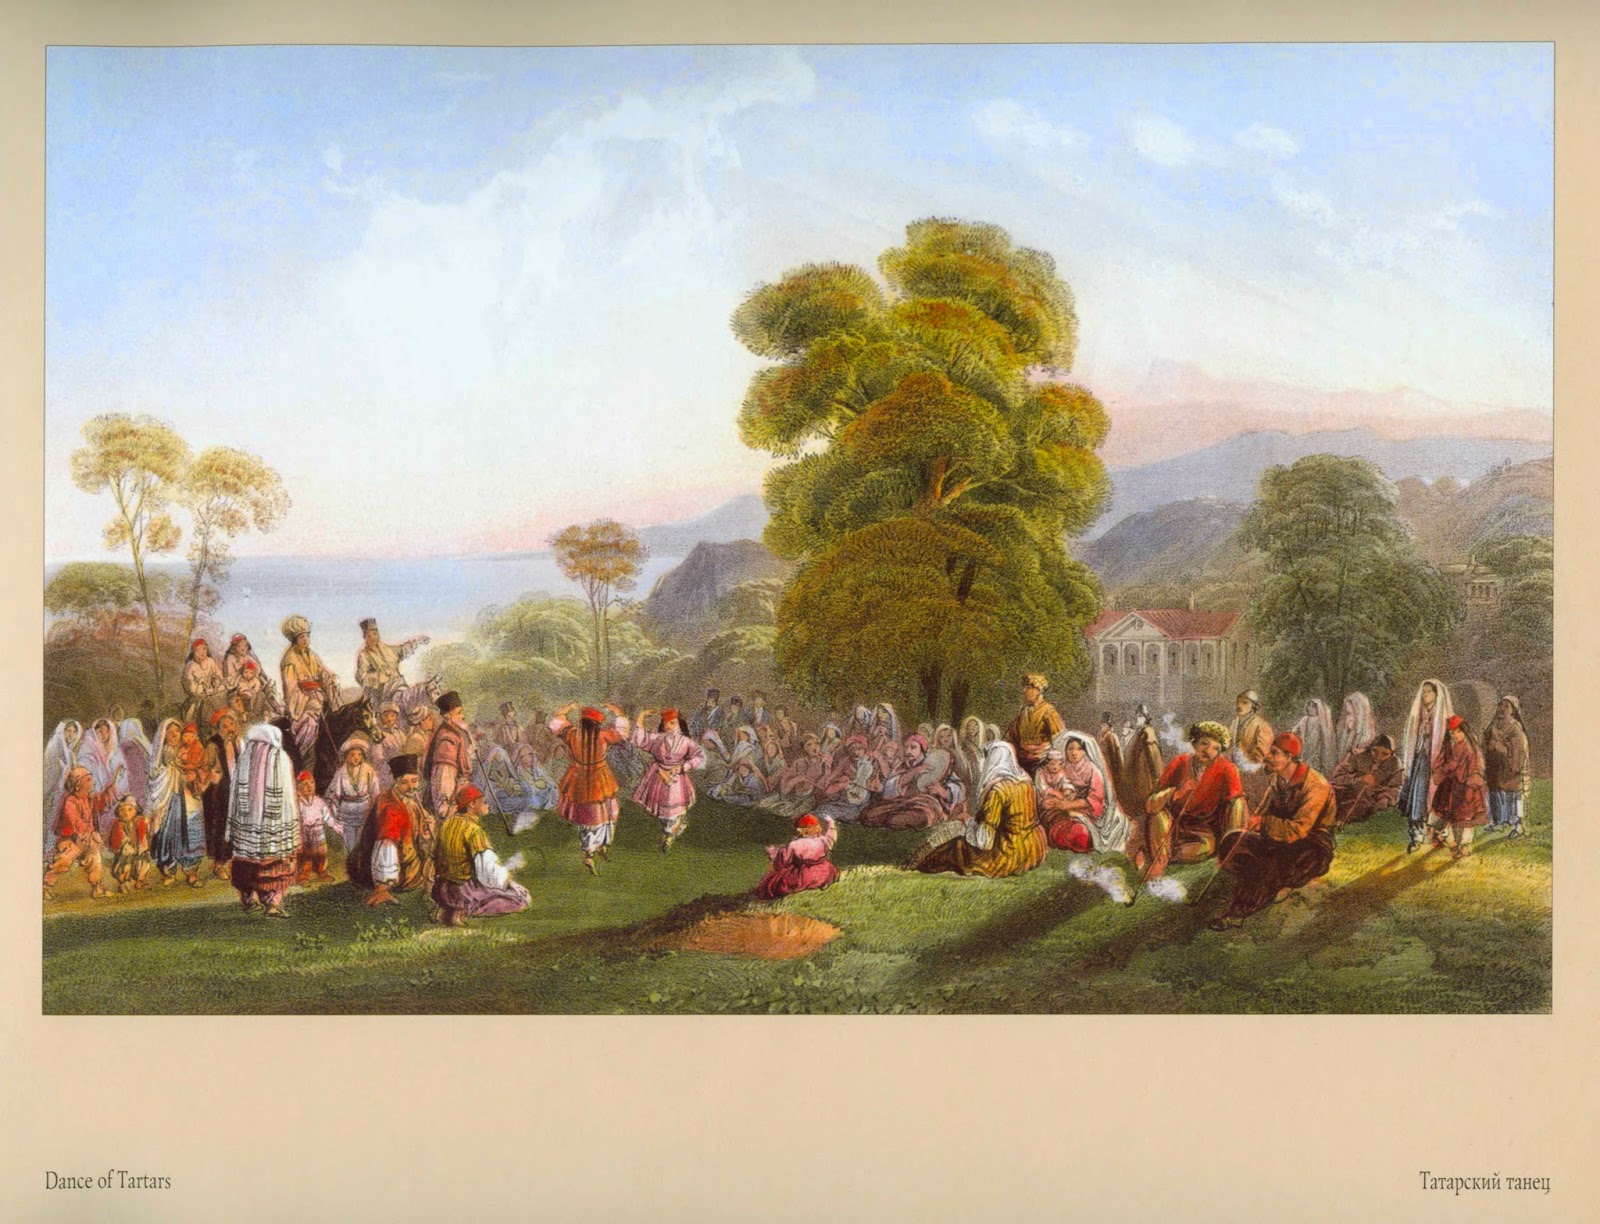 Dance of Tartars (1856), painting by Carlo Bossoli, a part of his Crimean travel collection published as an album of lithographs titled "The Beautiful Scenery And Chief Places Of Interest Throughout The Crimea"